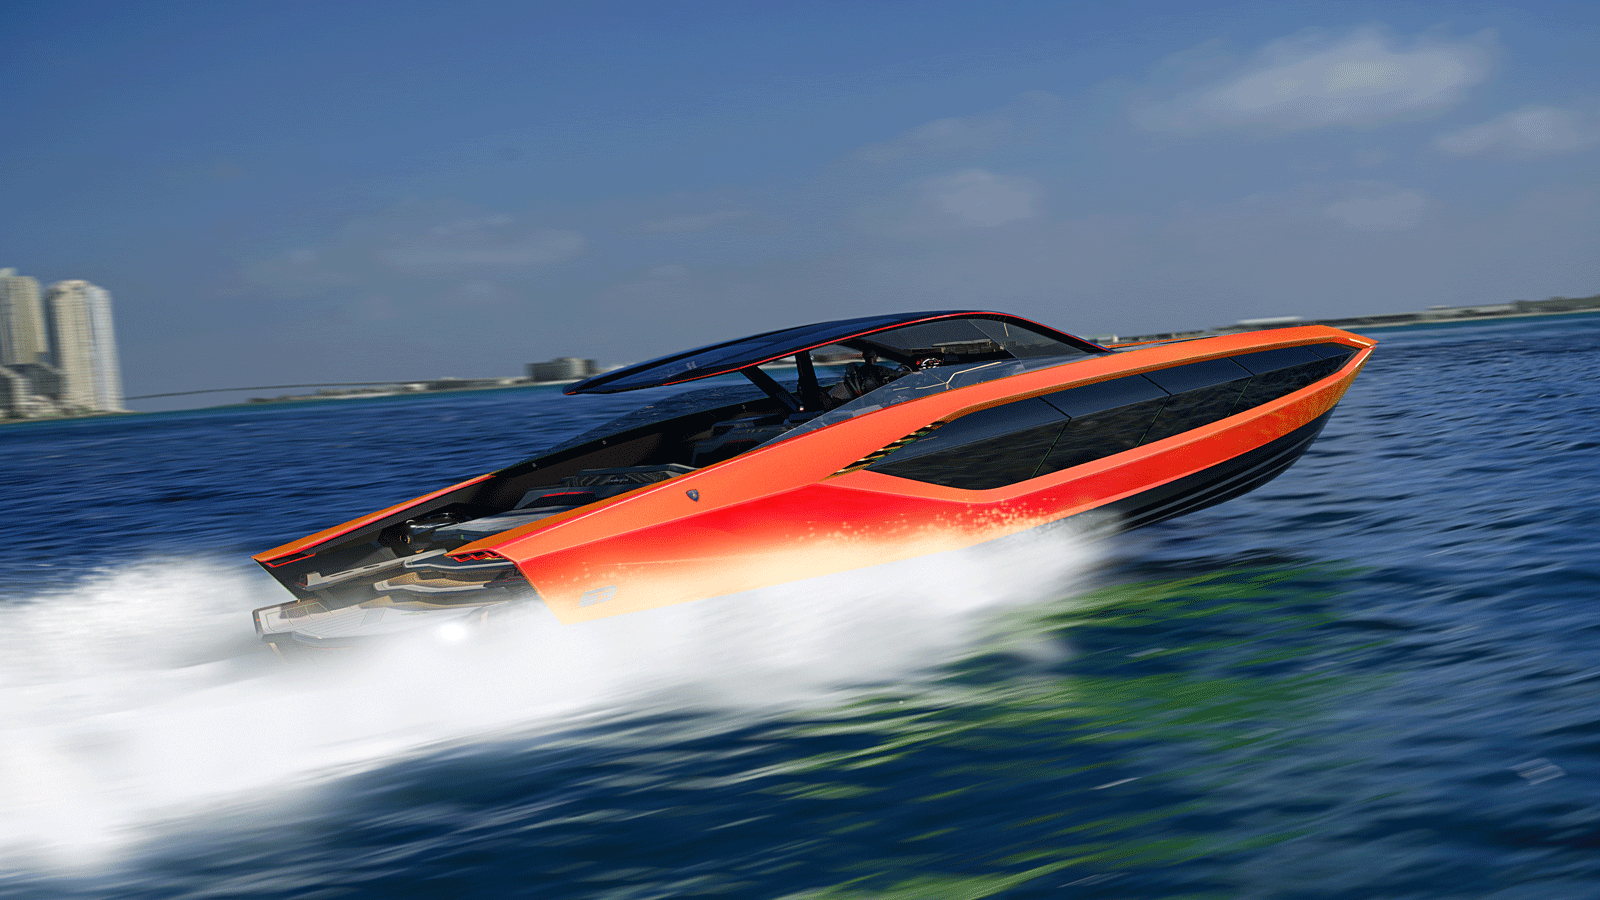 The Lamborghini motor yacht out on the open ocean